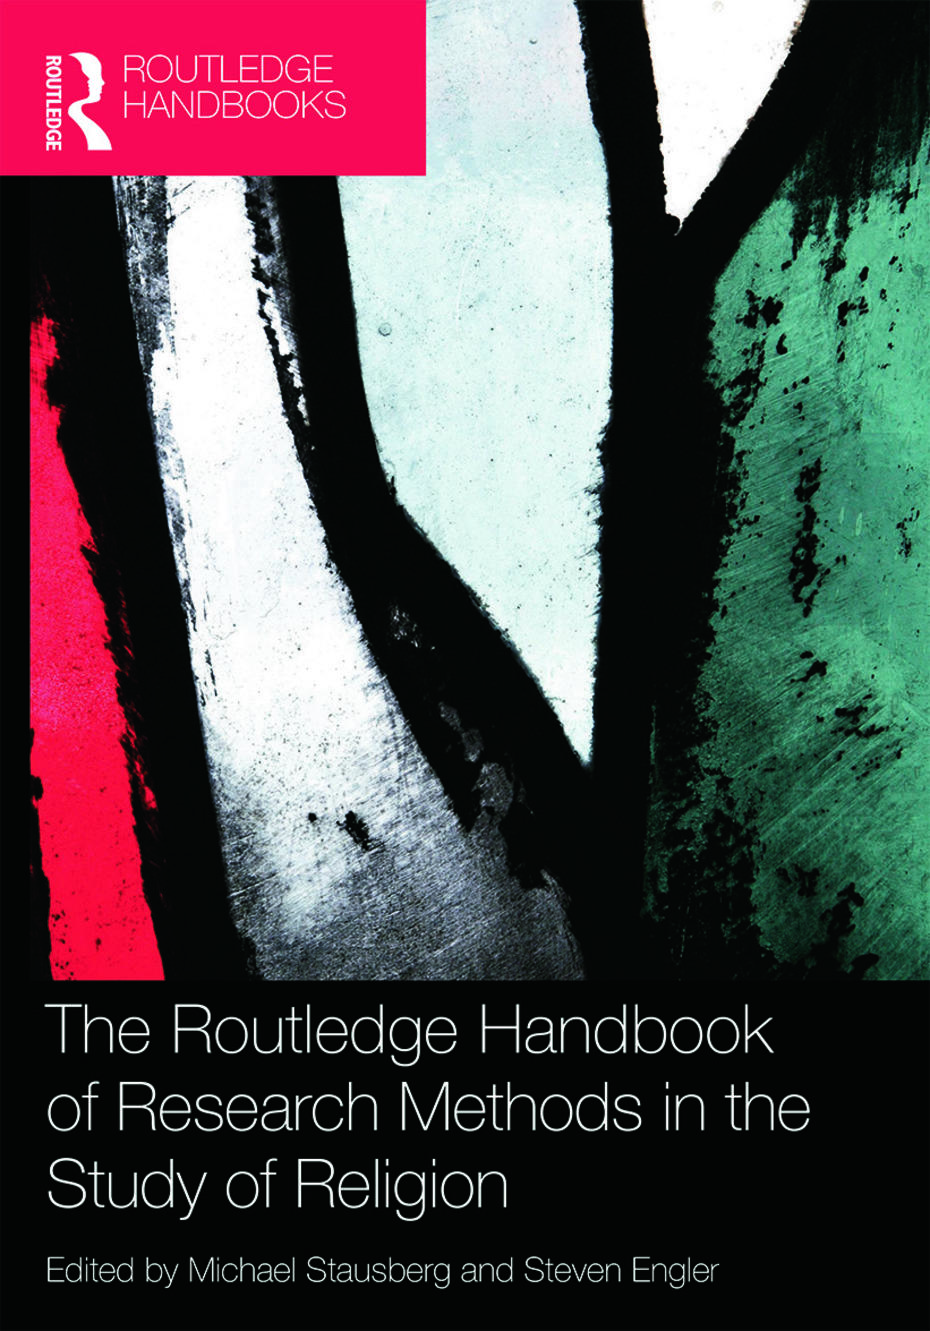 The Routledge Handbook of Research Methods in the Study of Religion (Cover)